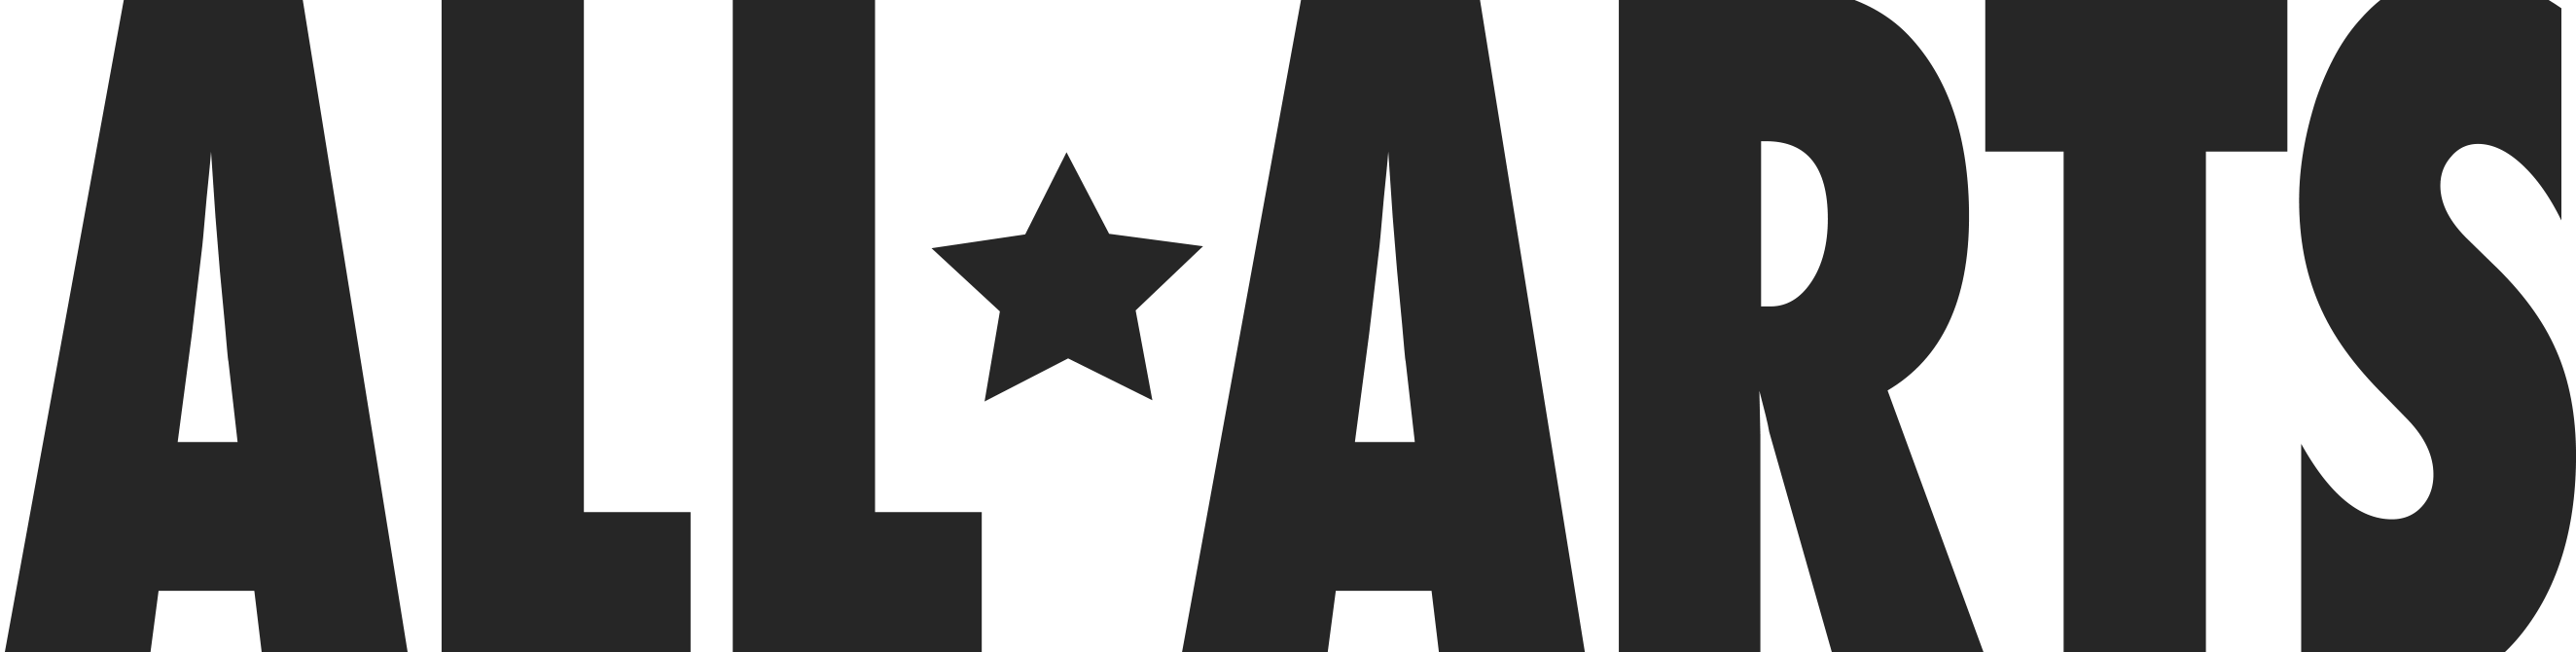 A logo for "All Arts". A small star separate the two, upper-case words.